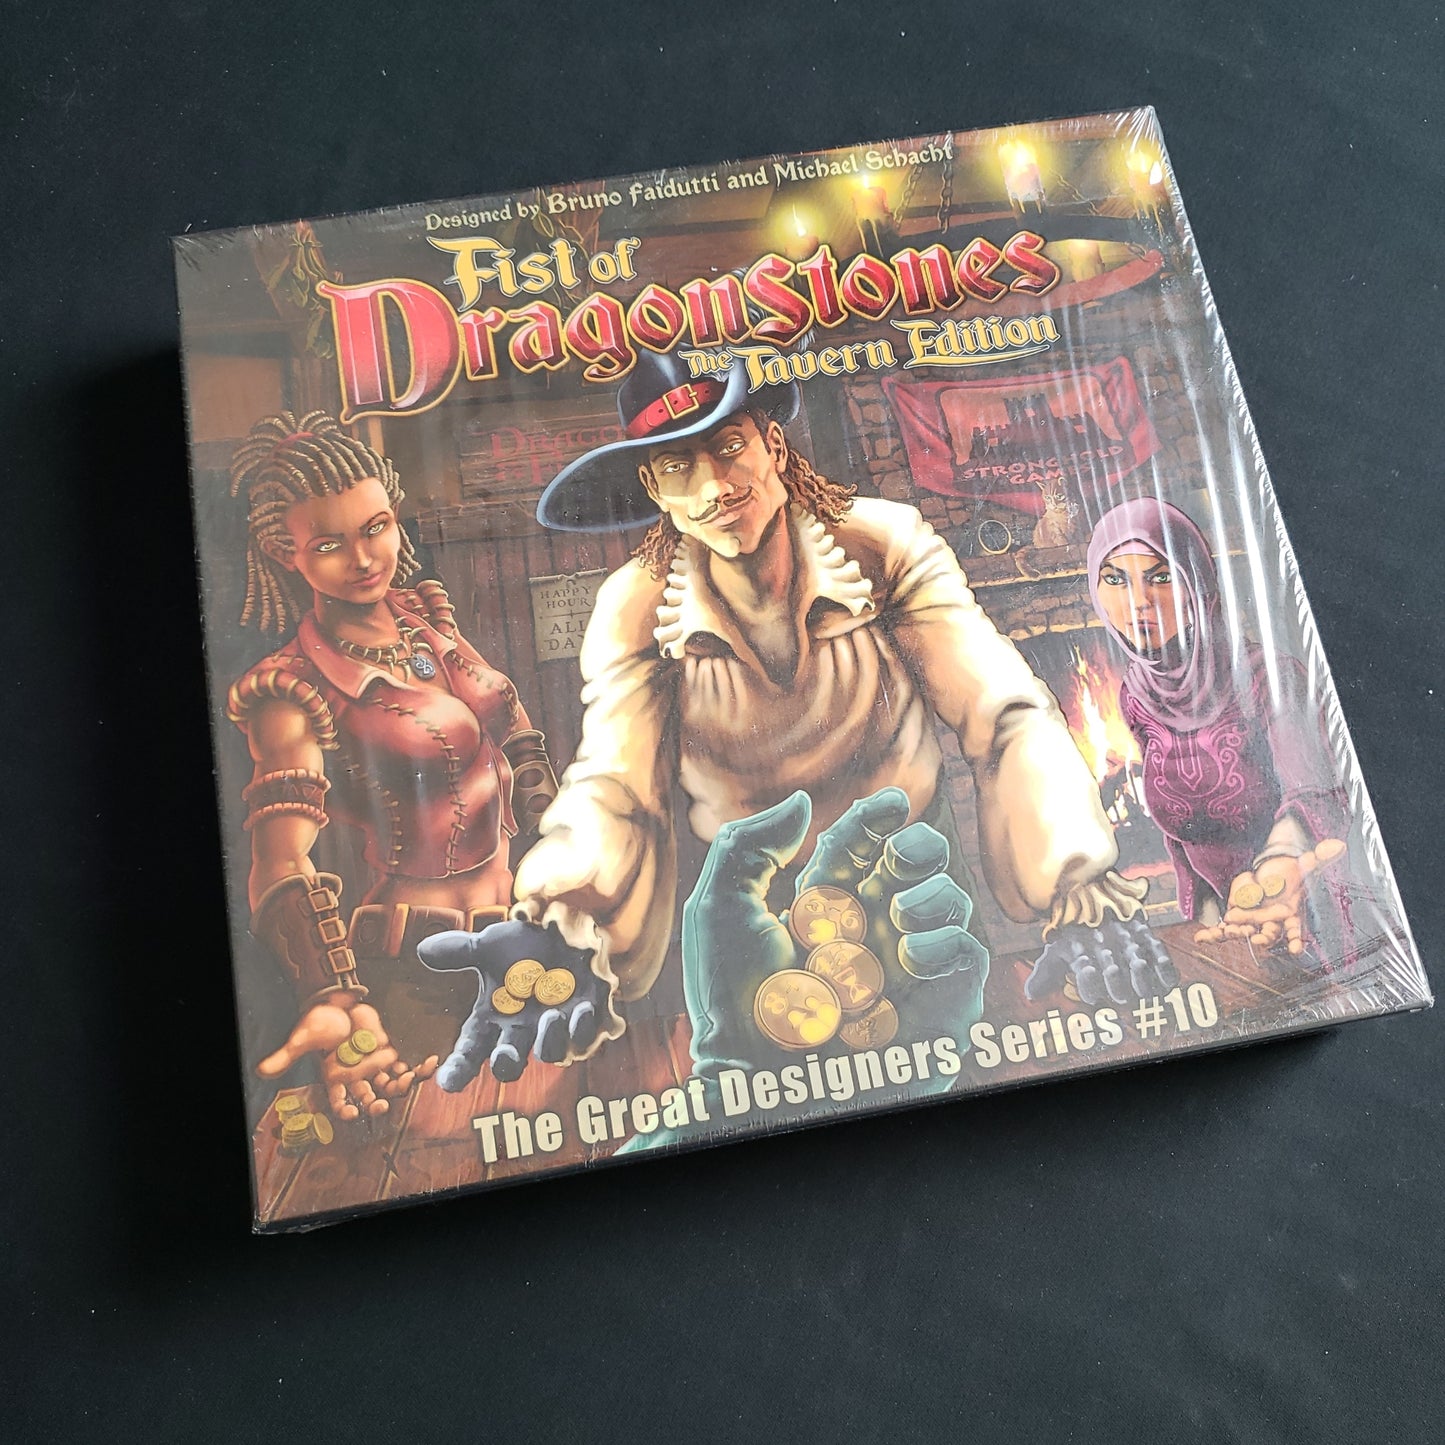 Image shows the front cover of the box of the Fist of Dragonstones: Tavern Edition board game